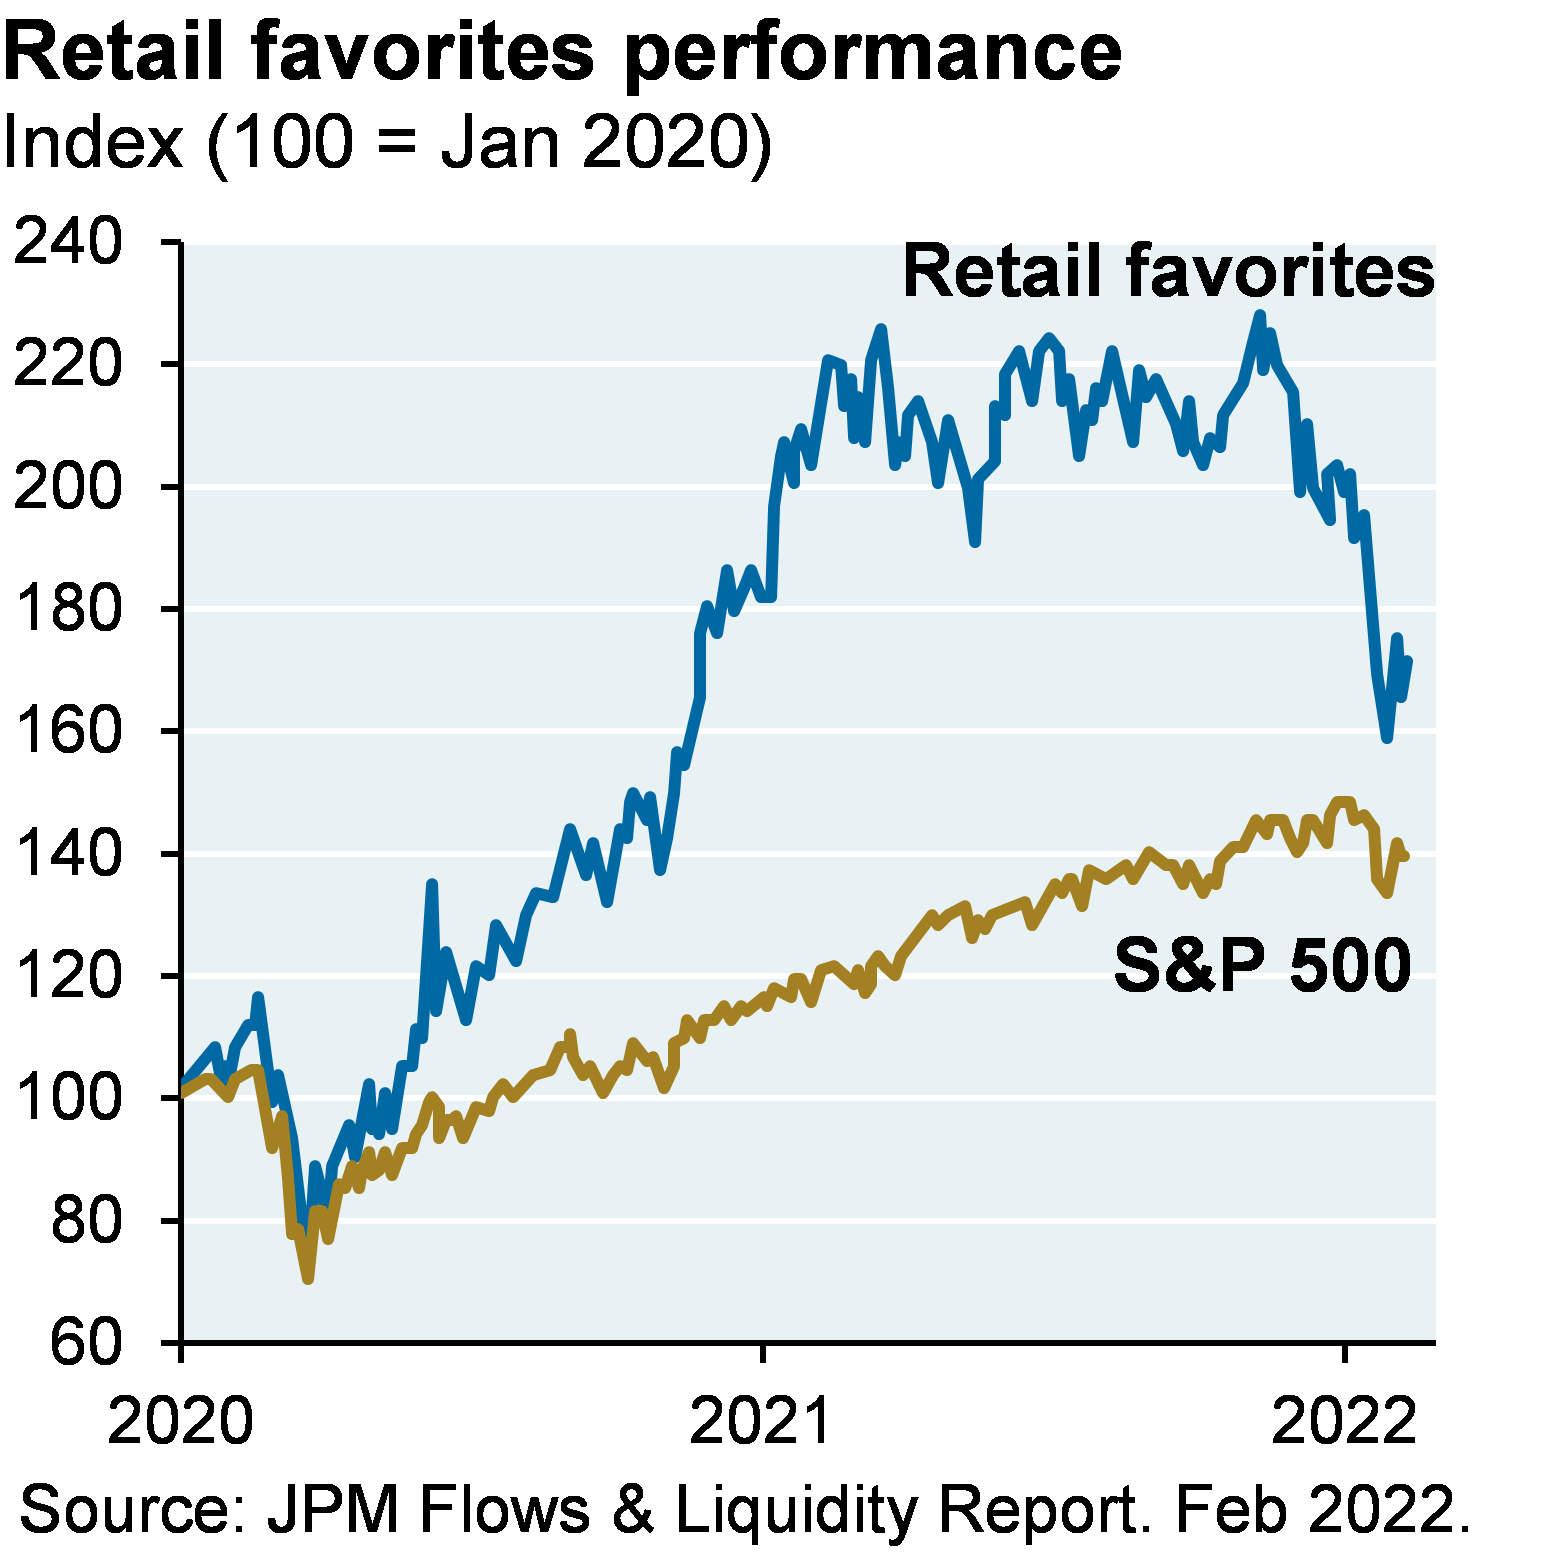 Line chart shows the decline in stocks heavily owned by retail investors, whose returns are now converging back to the S&P 500.